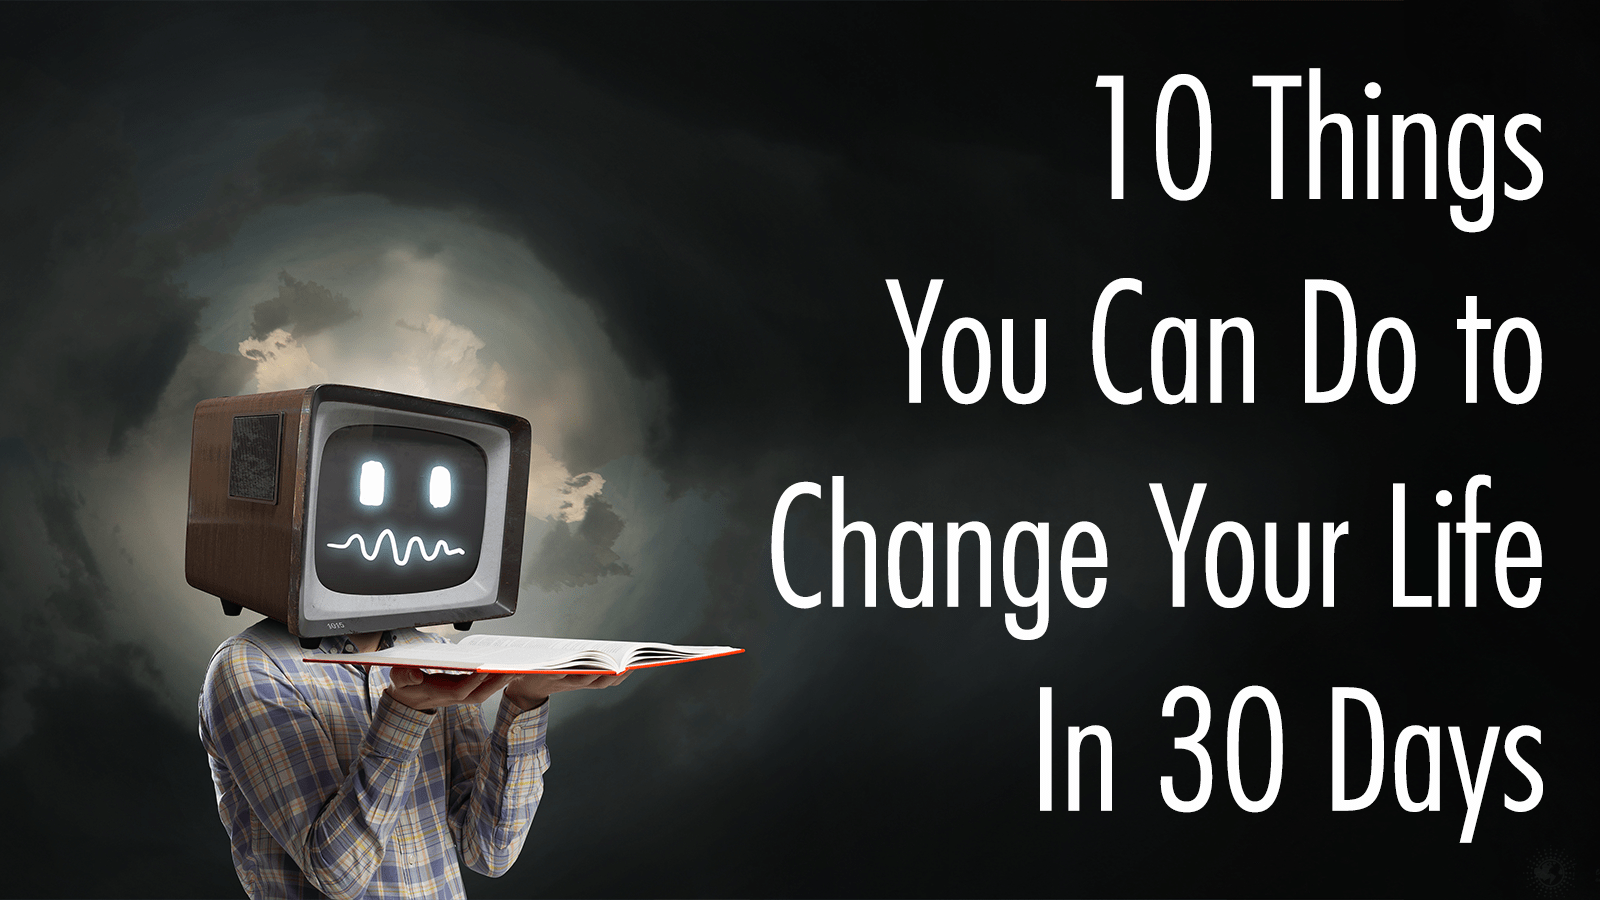 20 Things You Can Do to Change Your Life In 20 Days